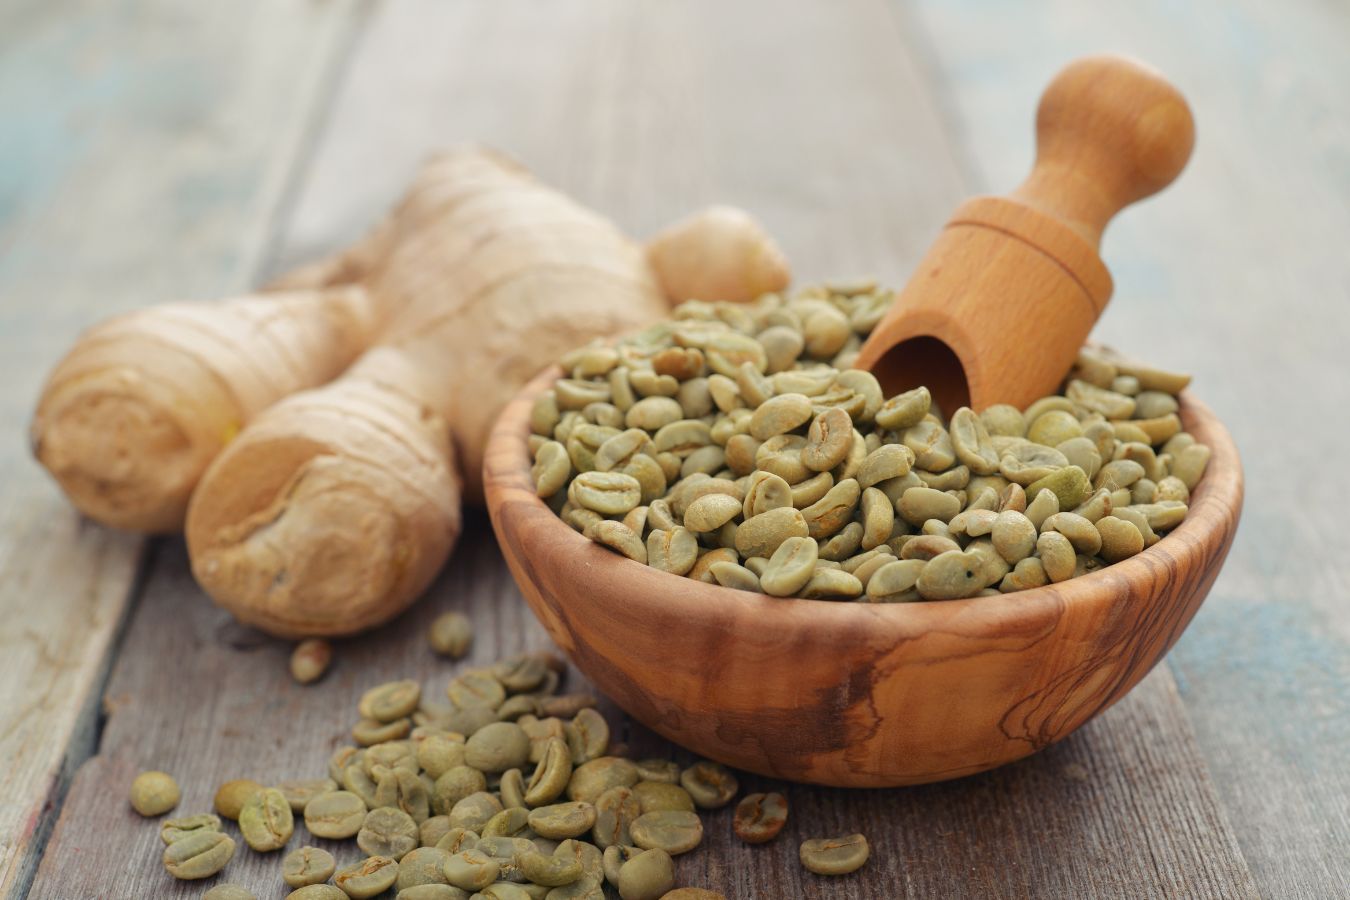 What Are Green Coffee Beans (Un-roasted Coffee)?